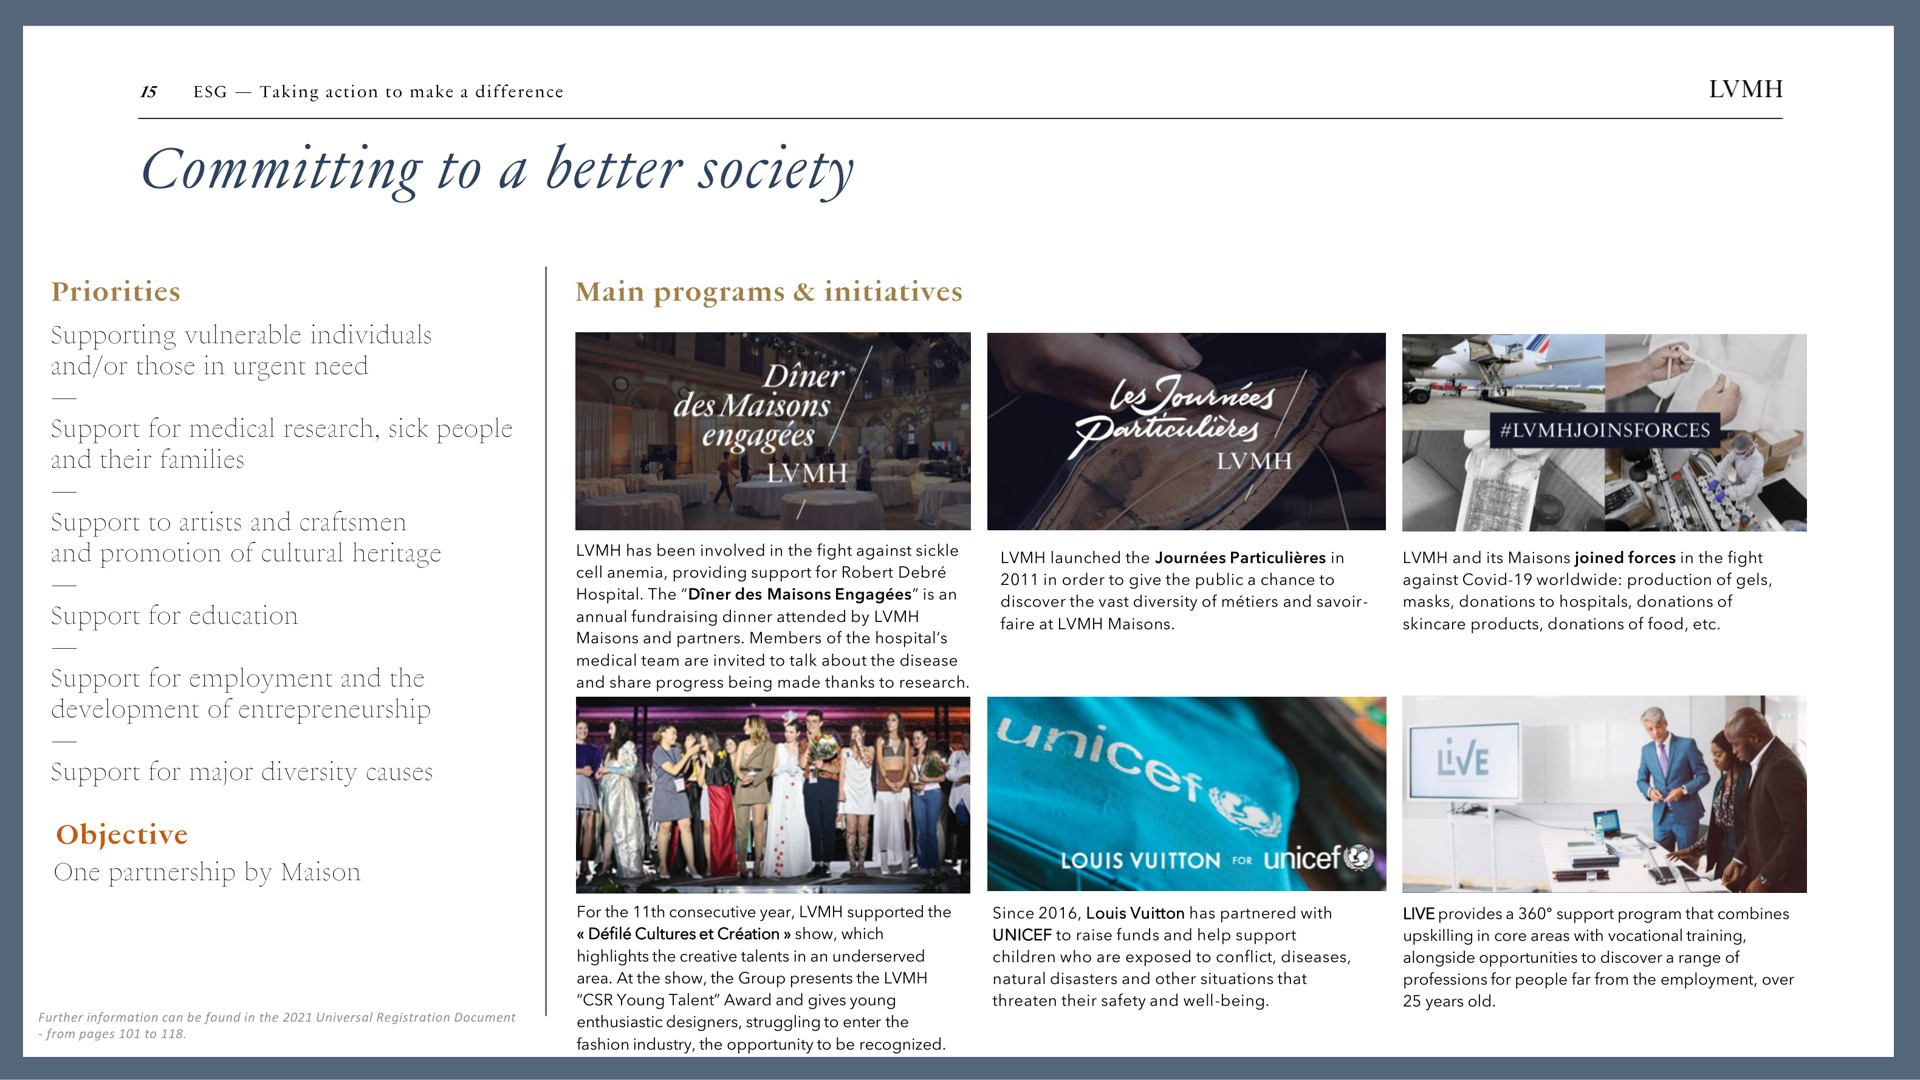 committing to a better society mae | LVMH